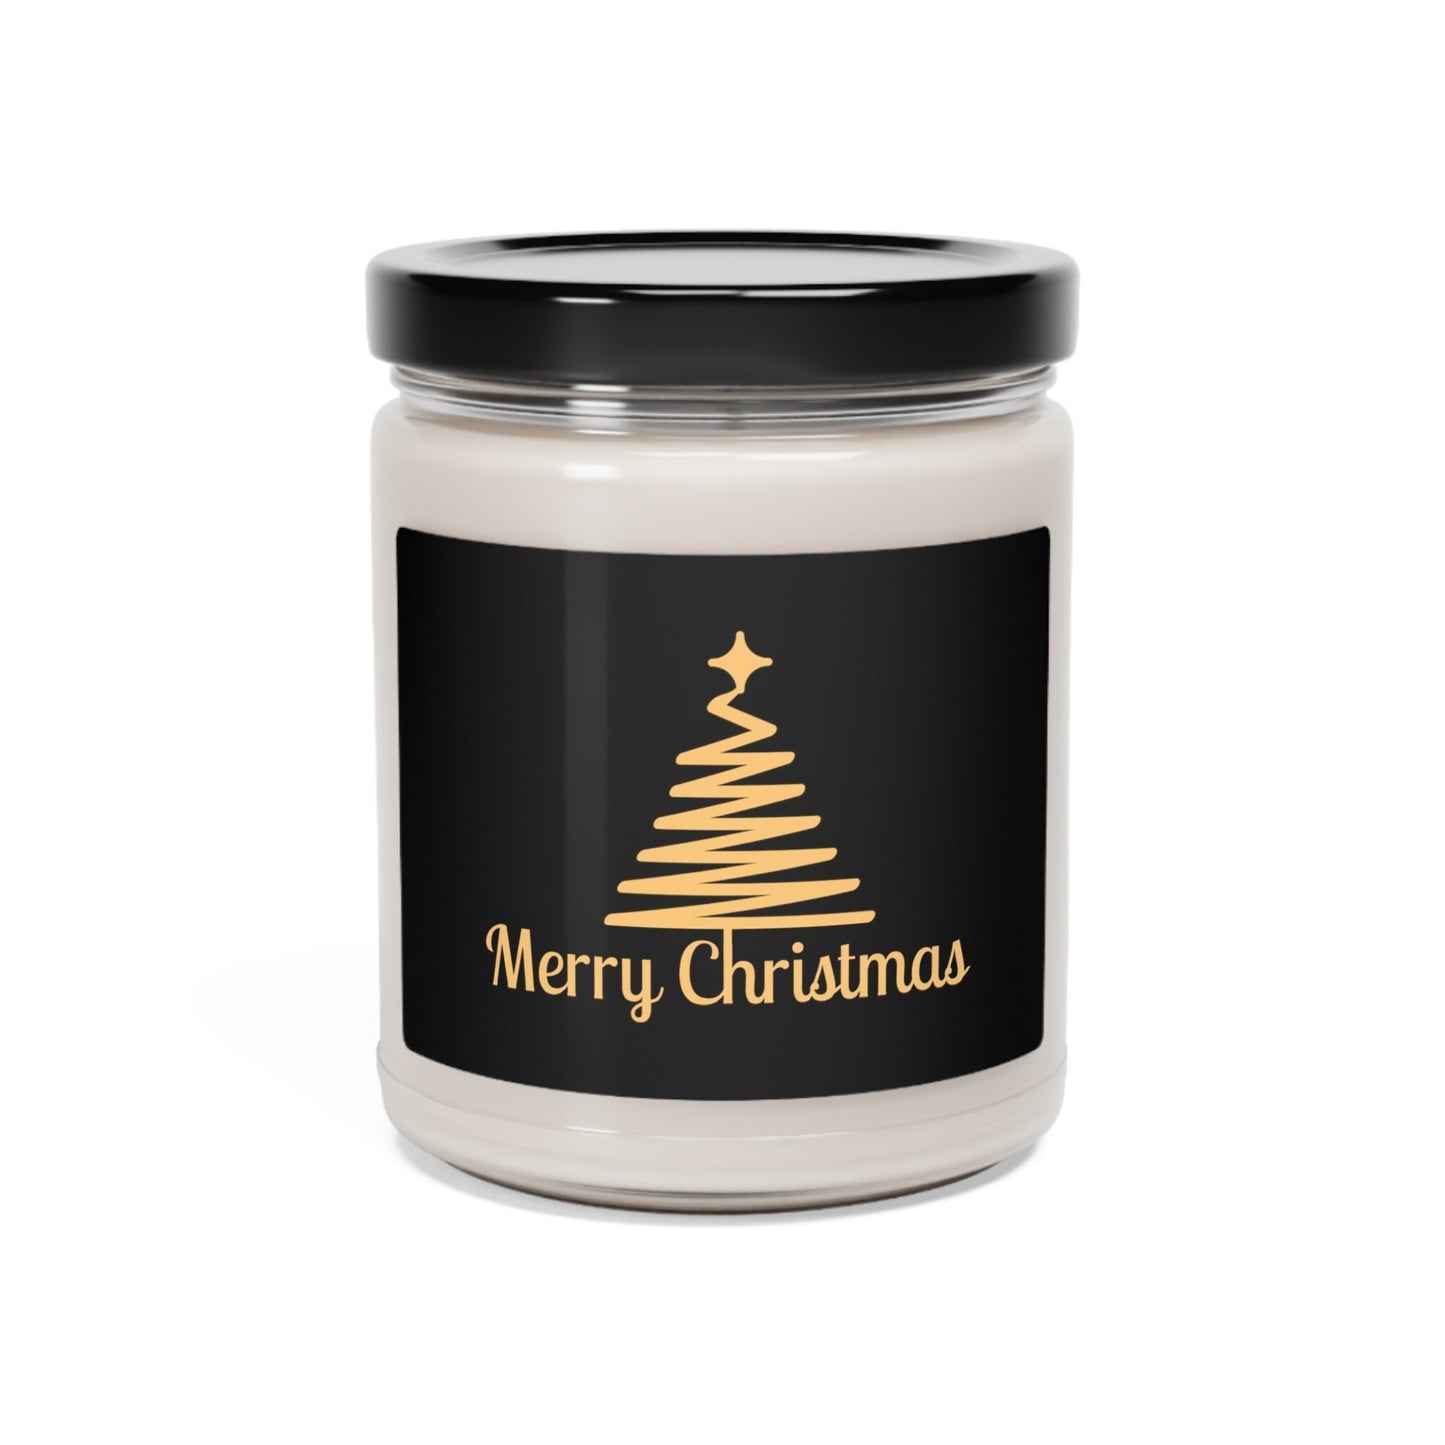 Merry Christmas black and gold Apple Harvest Scented Soy Candle, 9oz